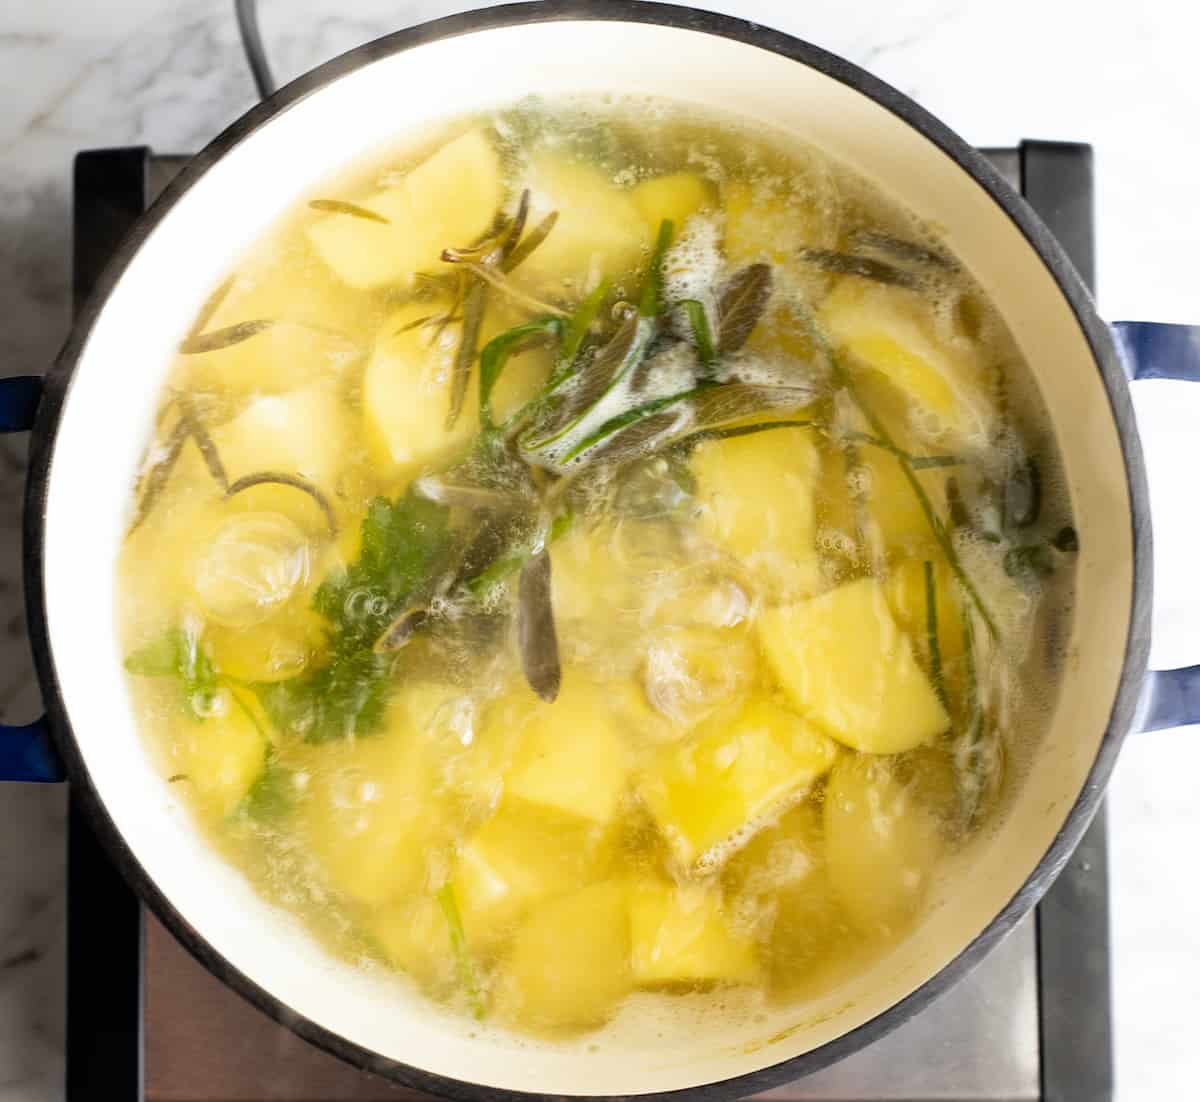 overhead photo showing how to make mashed potatoes - potatoes and herbs boiling in a pot